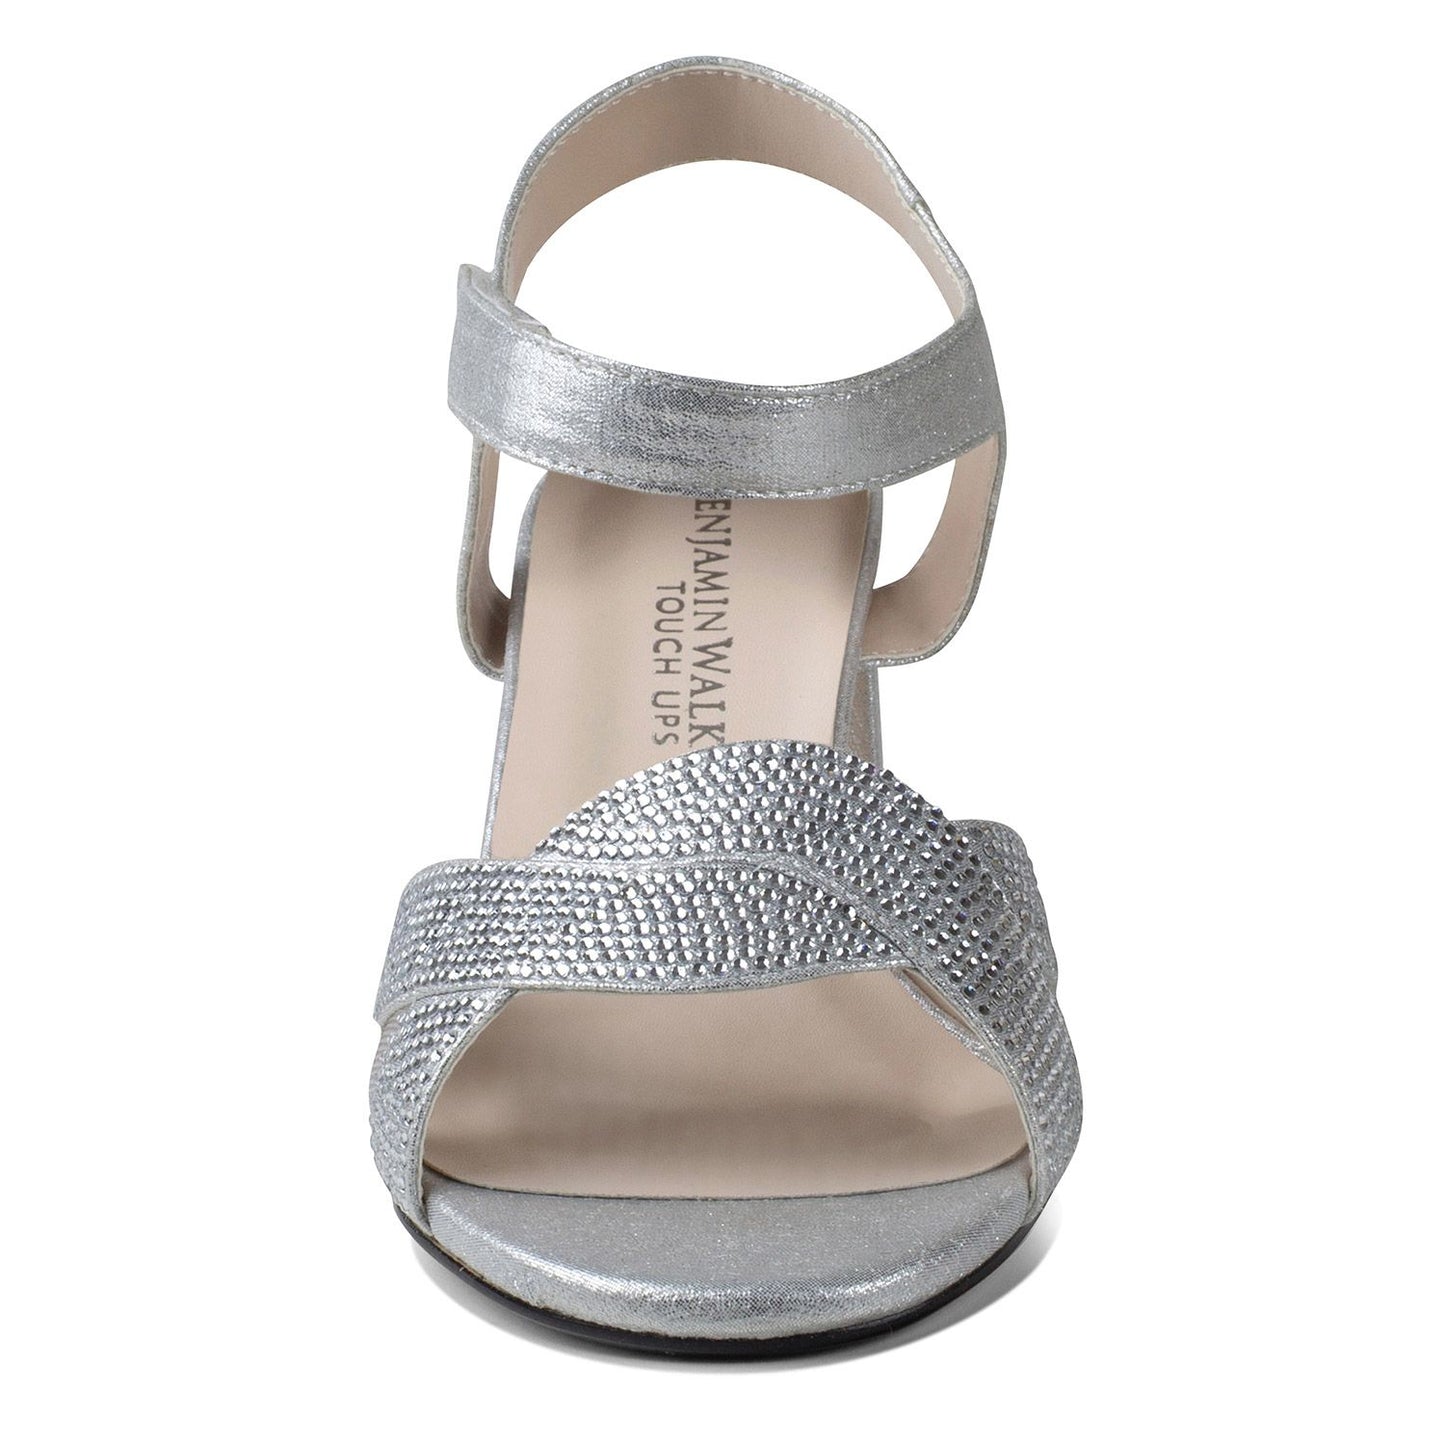 Front view of 2.25 inch silver shimmer shoe with block heel